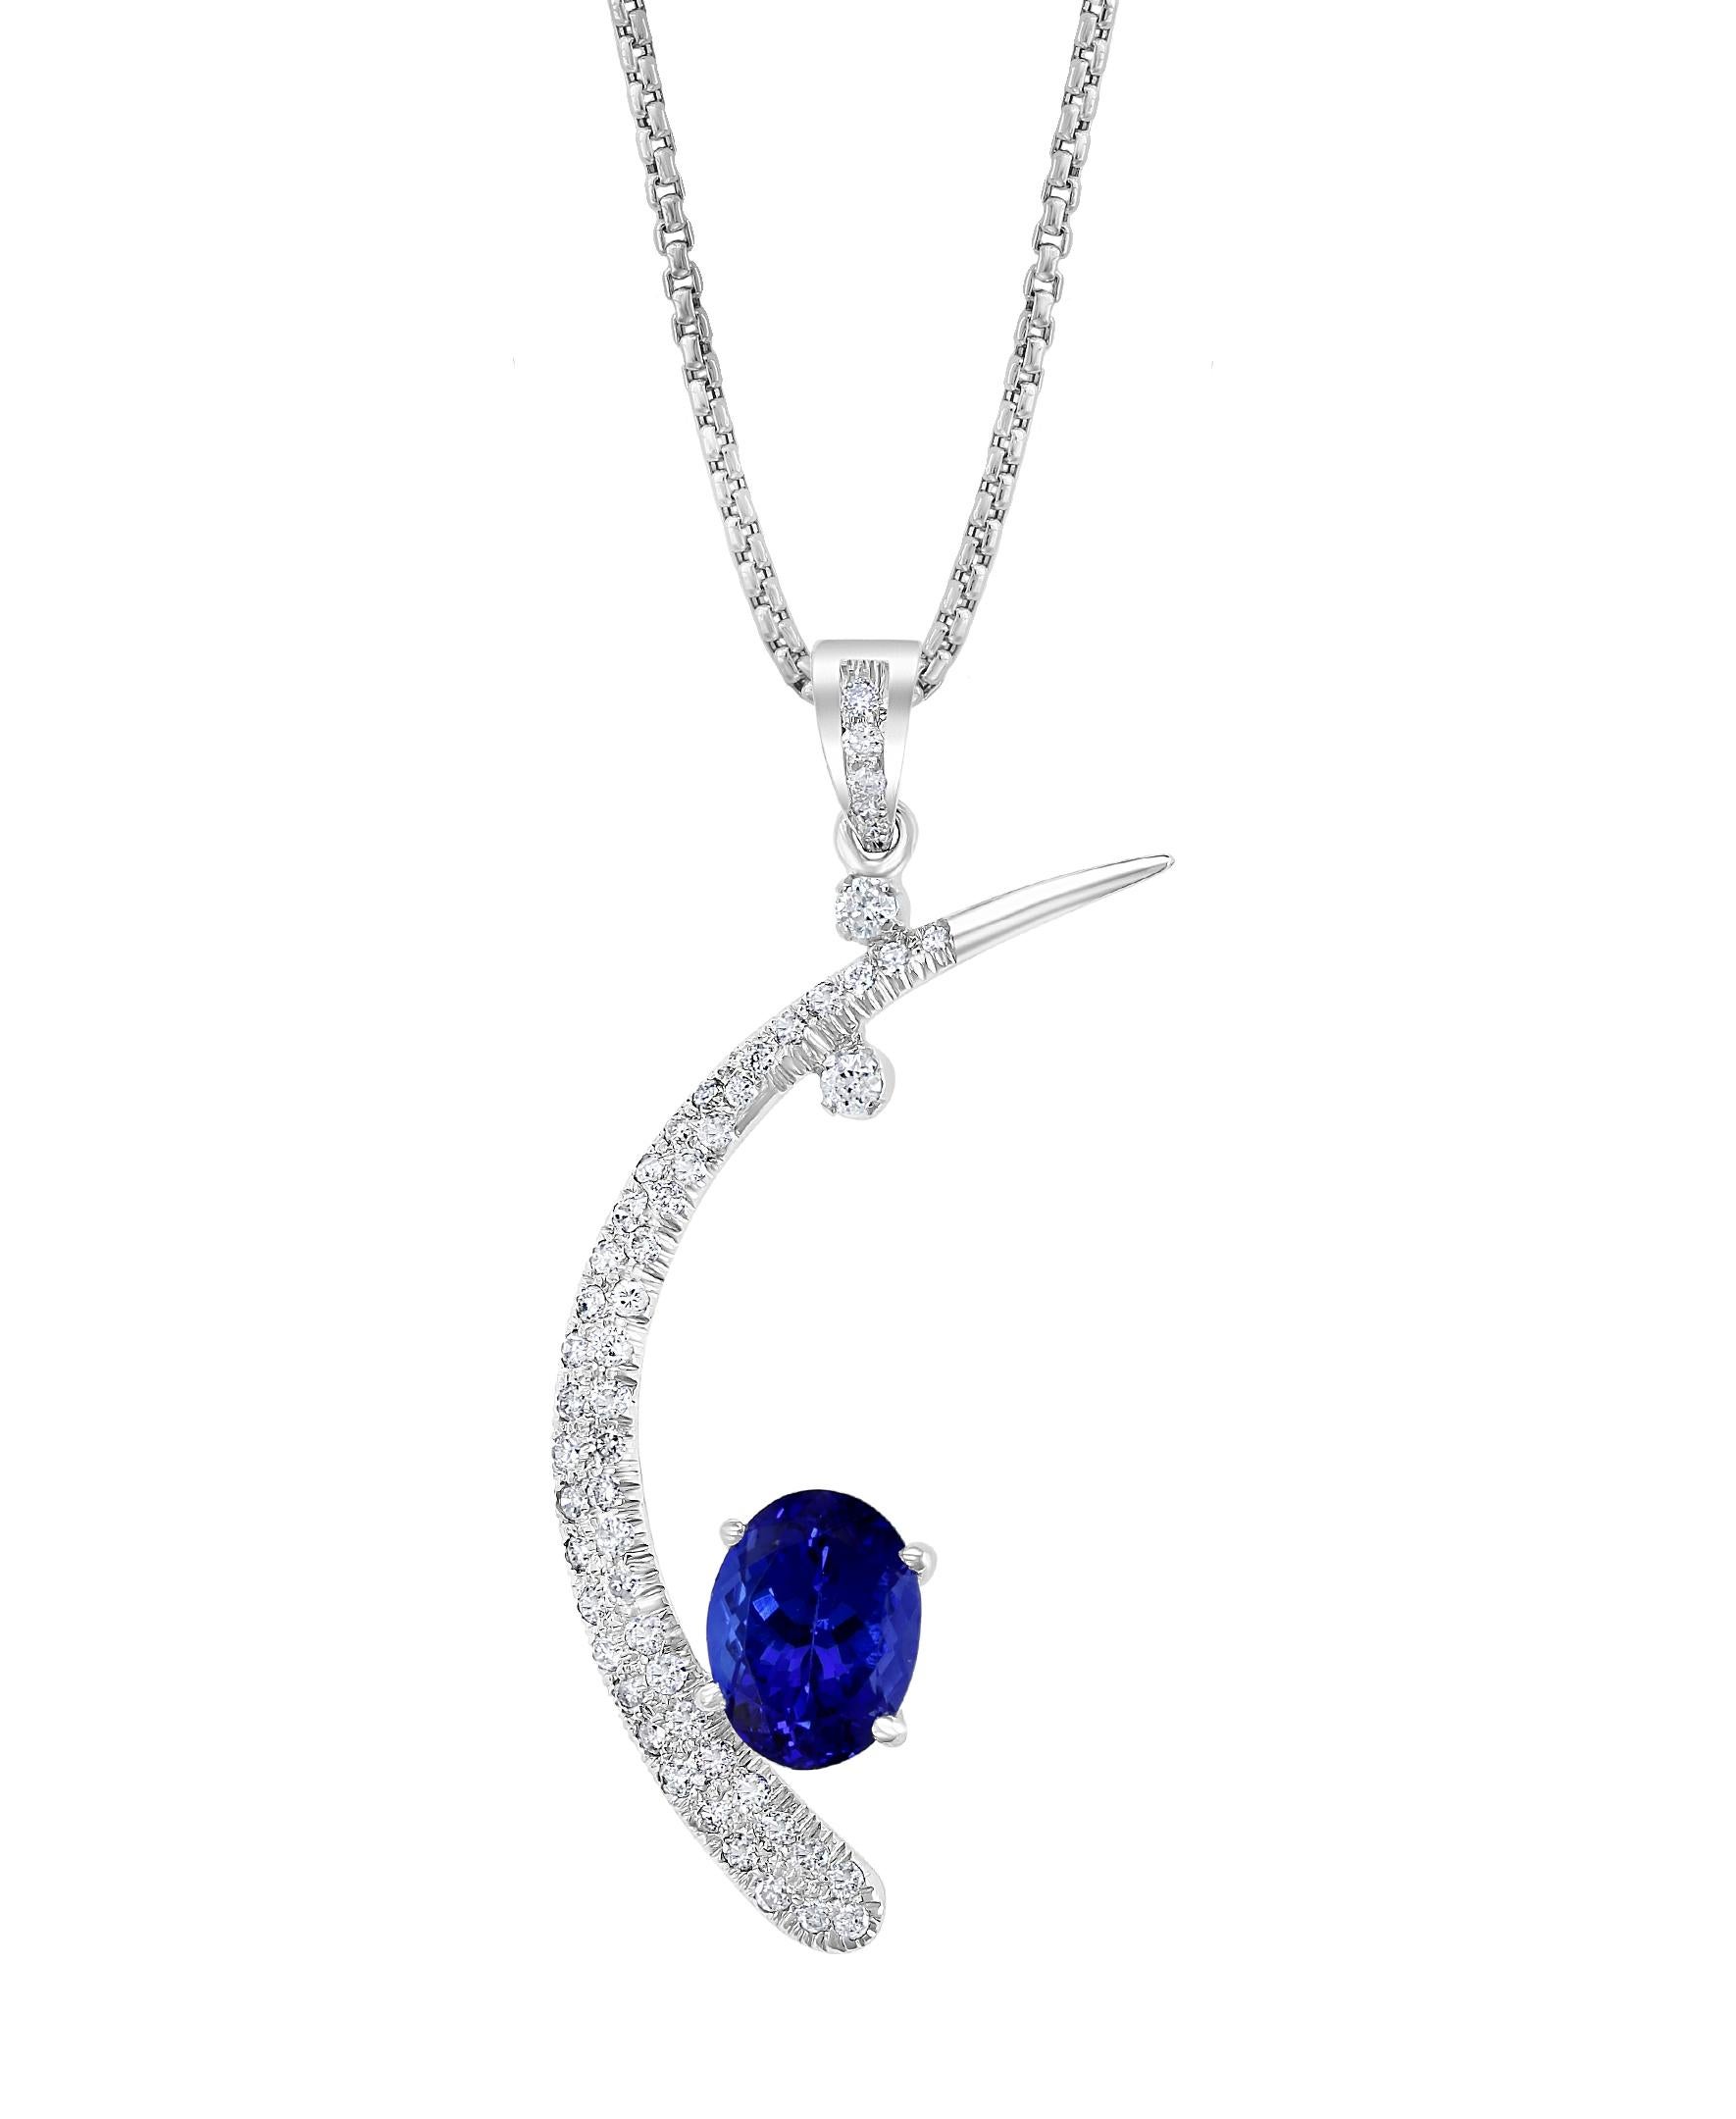 5 carats of fine  quality of  Tanzanite pendant surrounded by brilliant round  cut Diamonds all mounted in 18 karat White  gold. Weight of the necklace is 6 Grams . 
Tanzanite Weight  approximately 5  Carats, AAA quality of Tanzanite , very fine